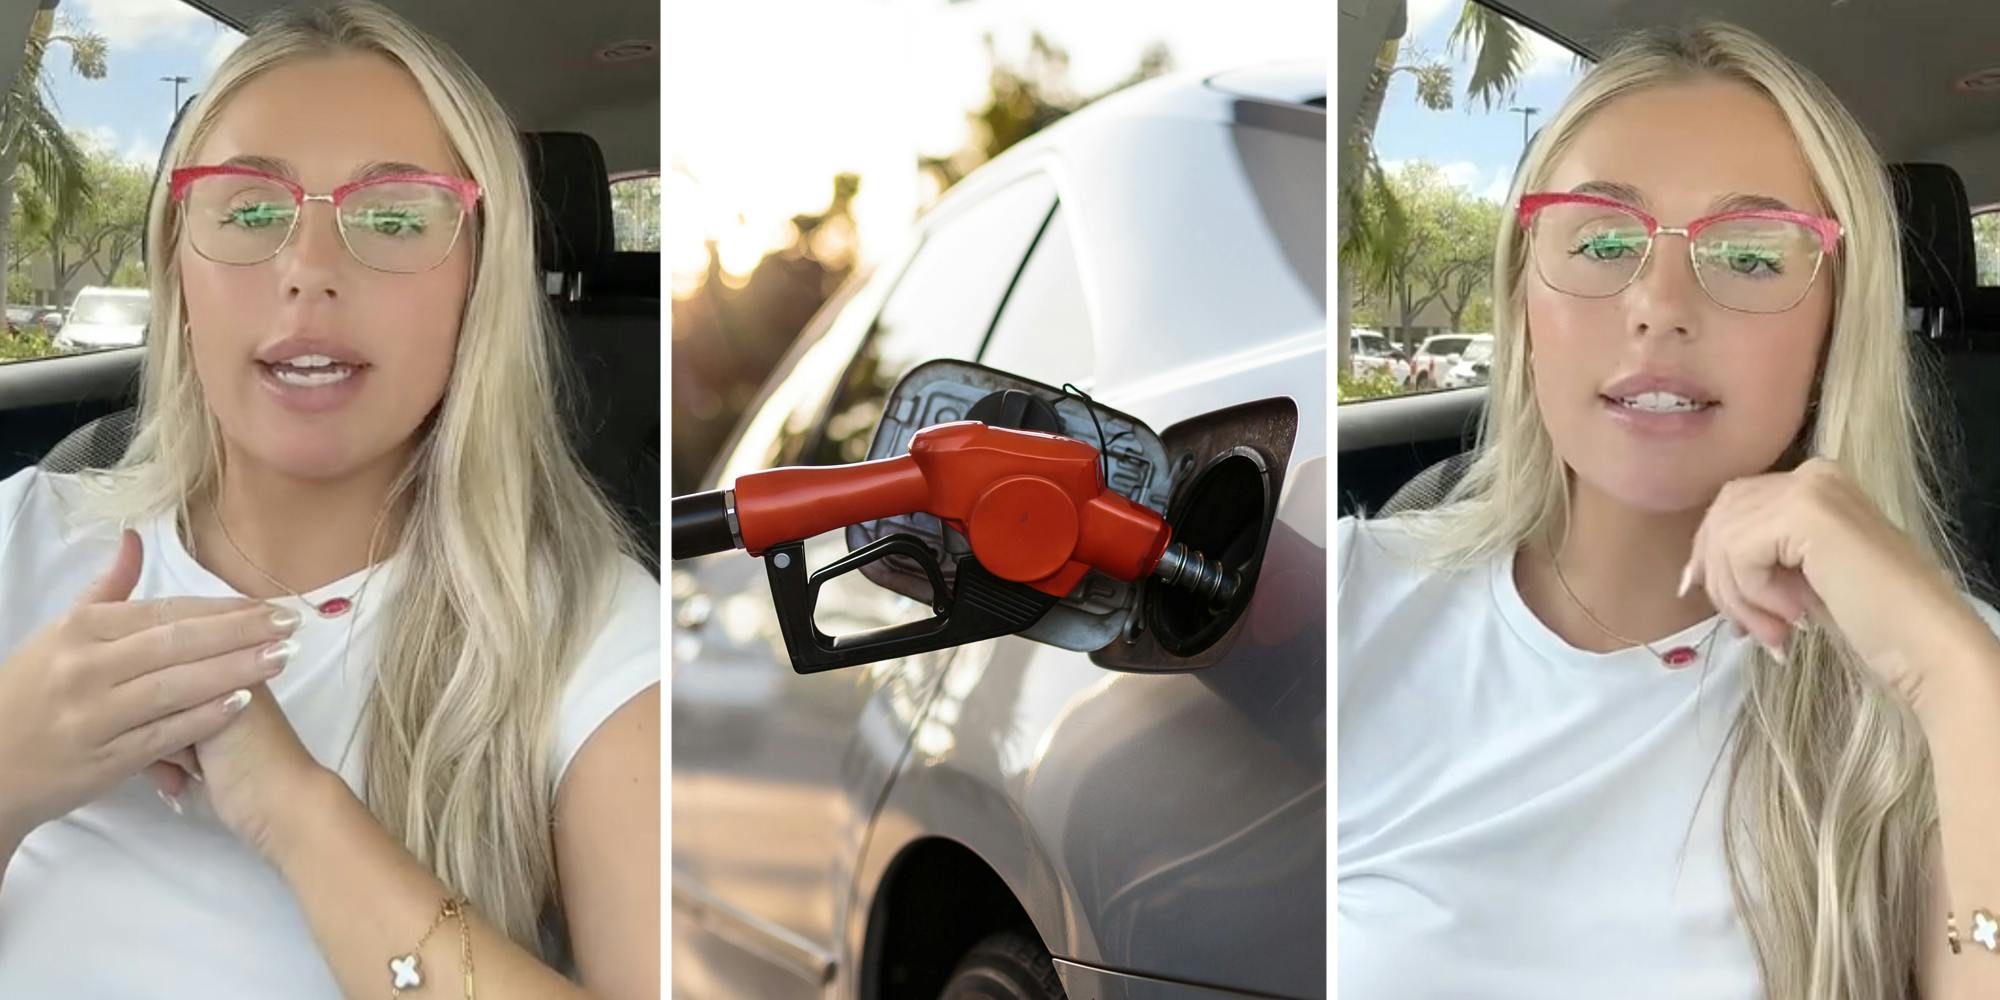 ‘There’s literally lettuce in my hair from throwing my sandwich’: Viewers divided after woman says to lock your car doors while pumping gas